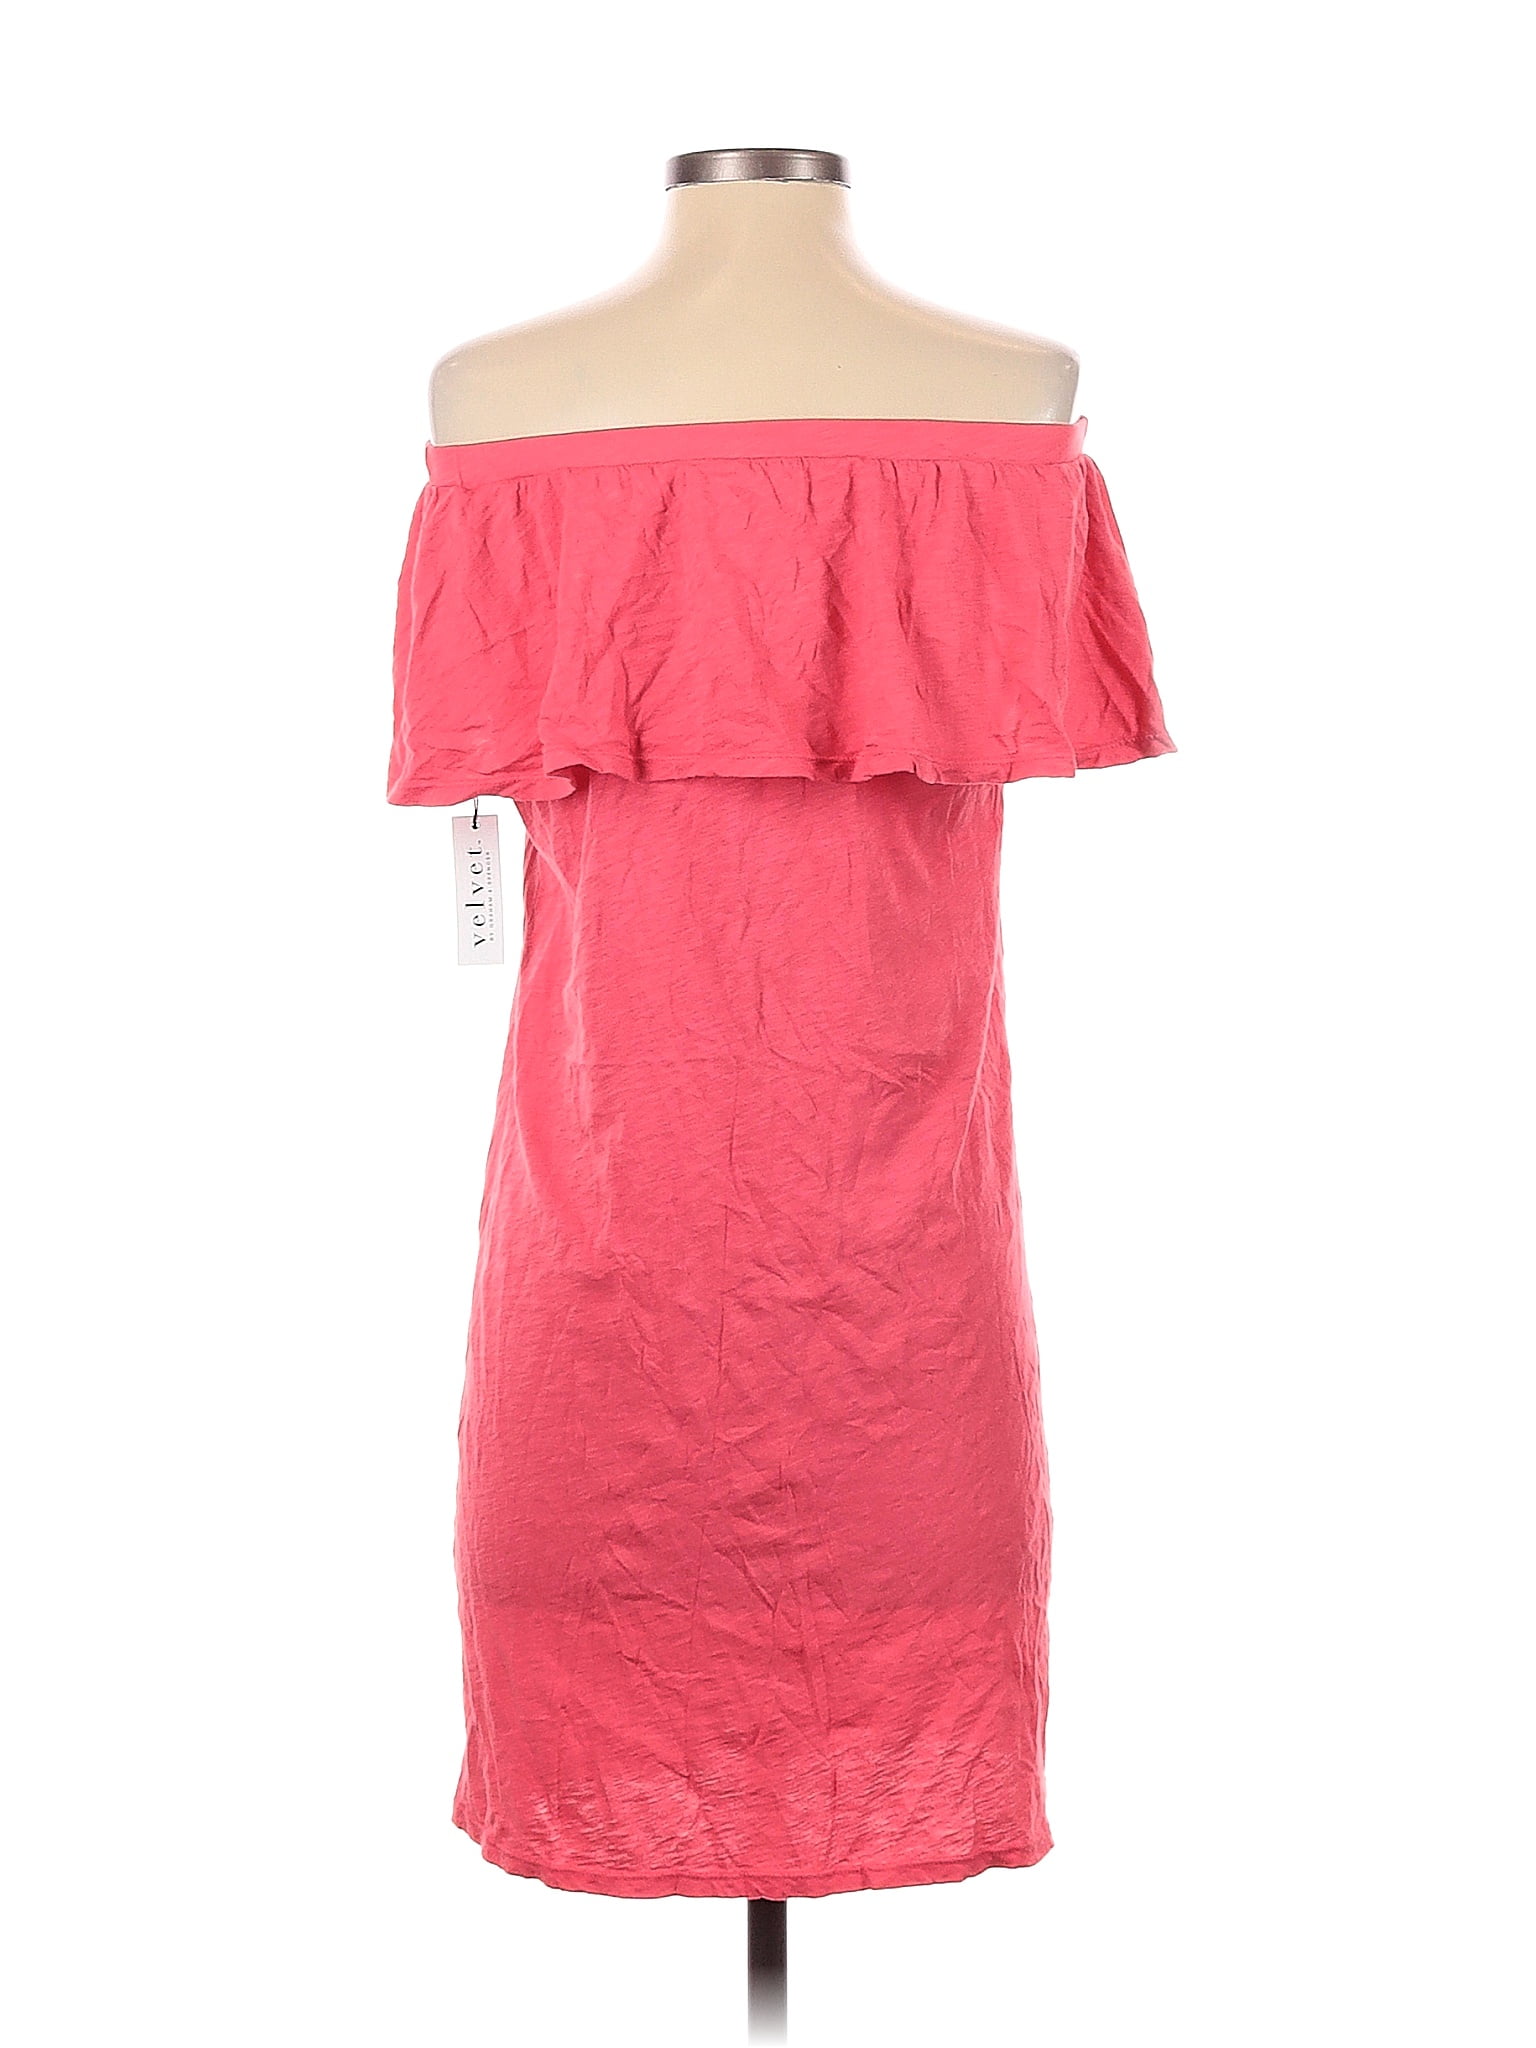 Velvet by Graham & Spencer 100% Cotton Solid Pink Casual Dress Size XS -  83% off